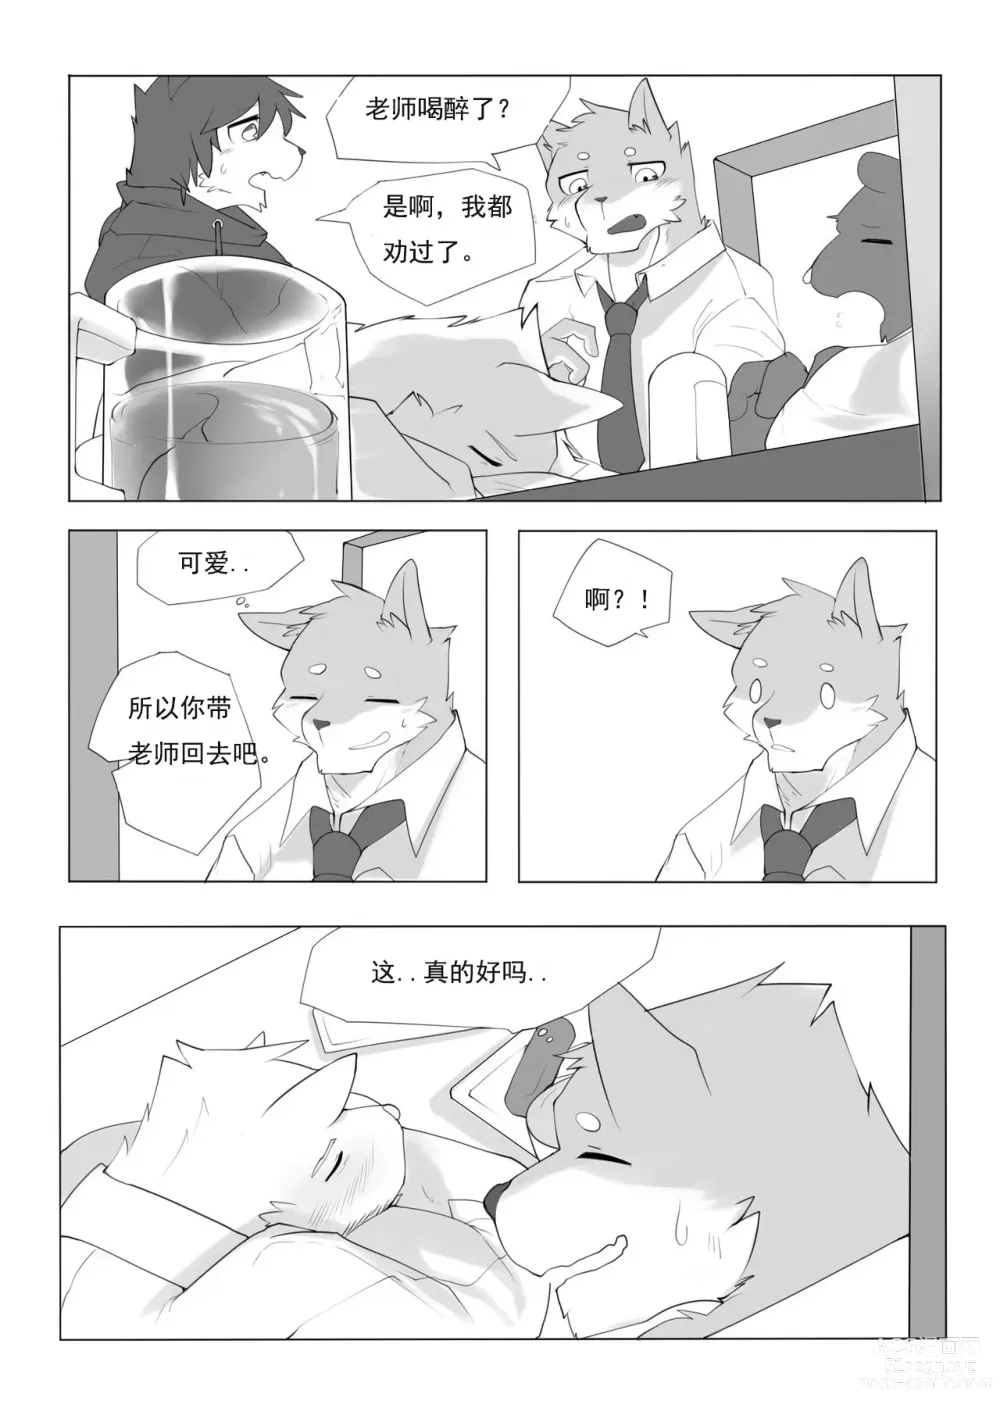 Page 13 of doujinshi 单恋 （工口译制）